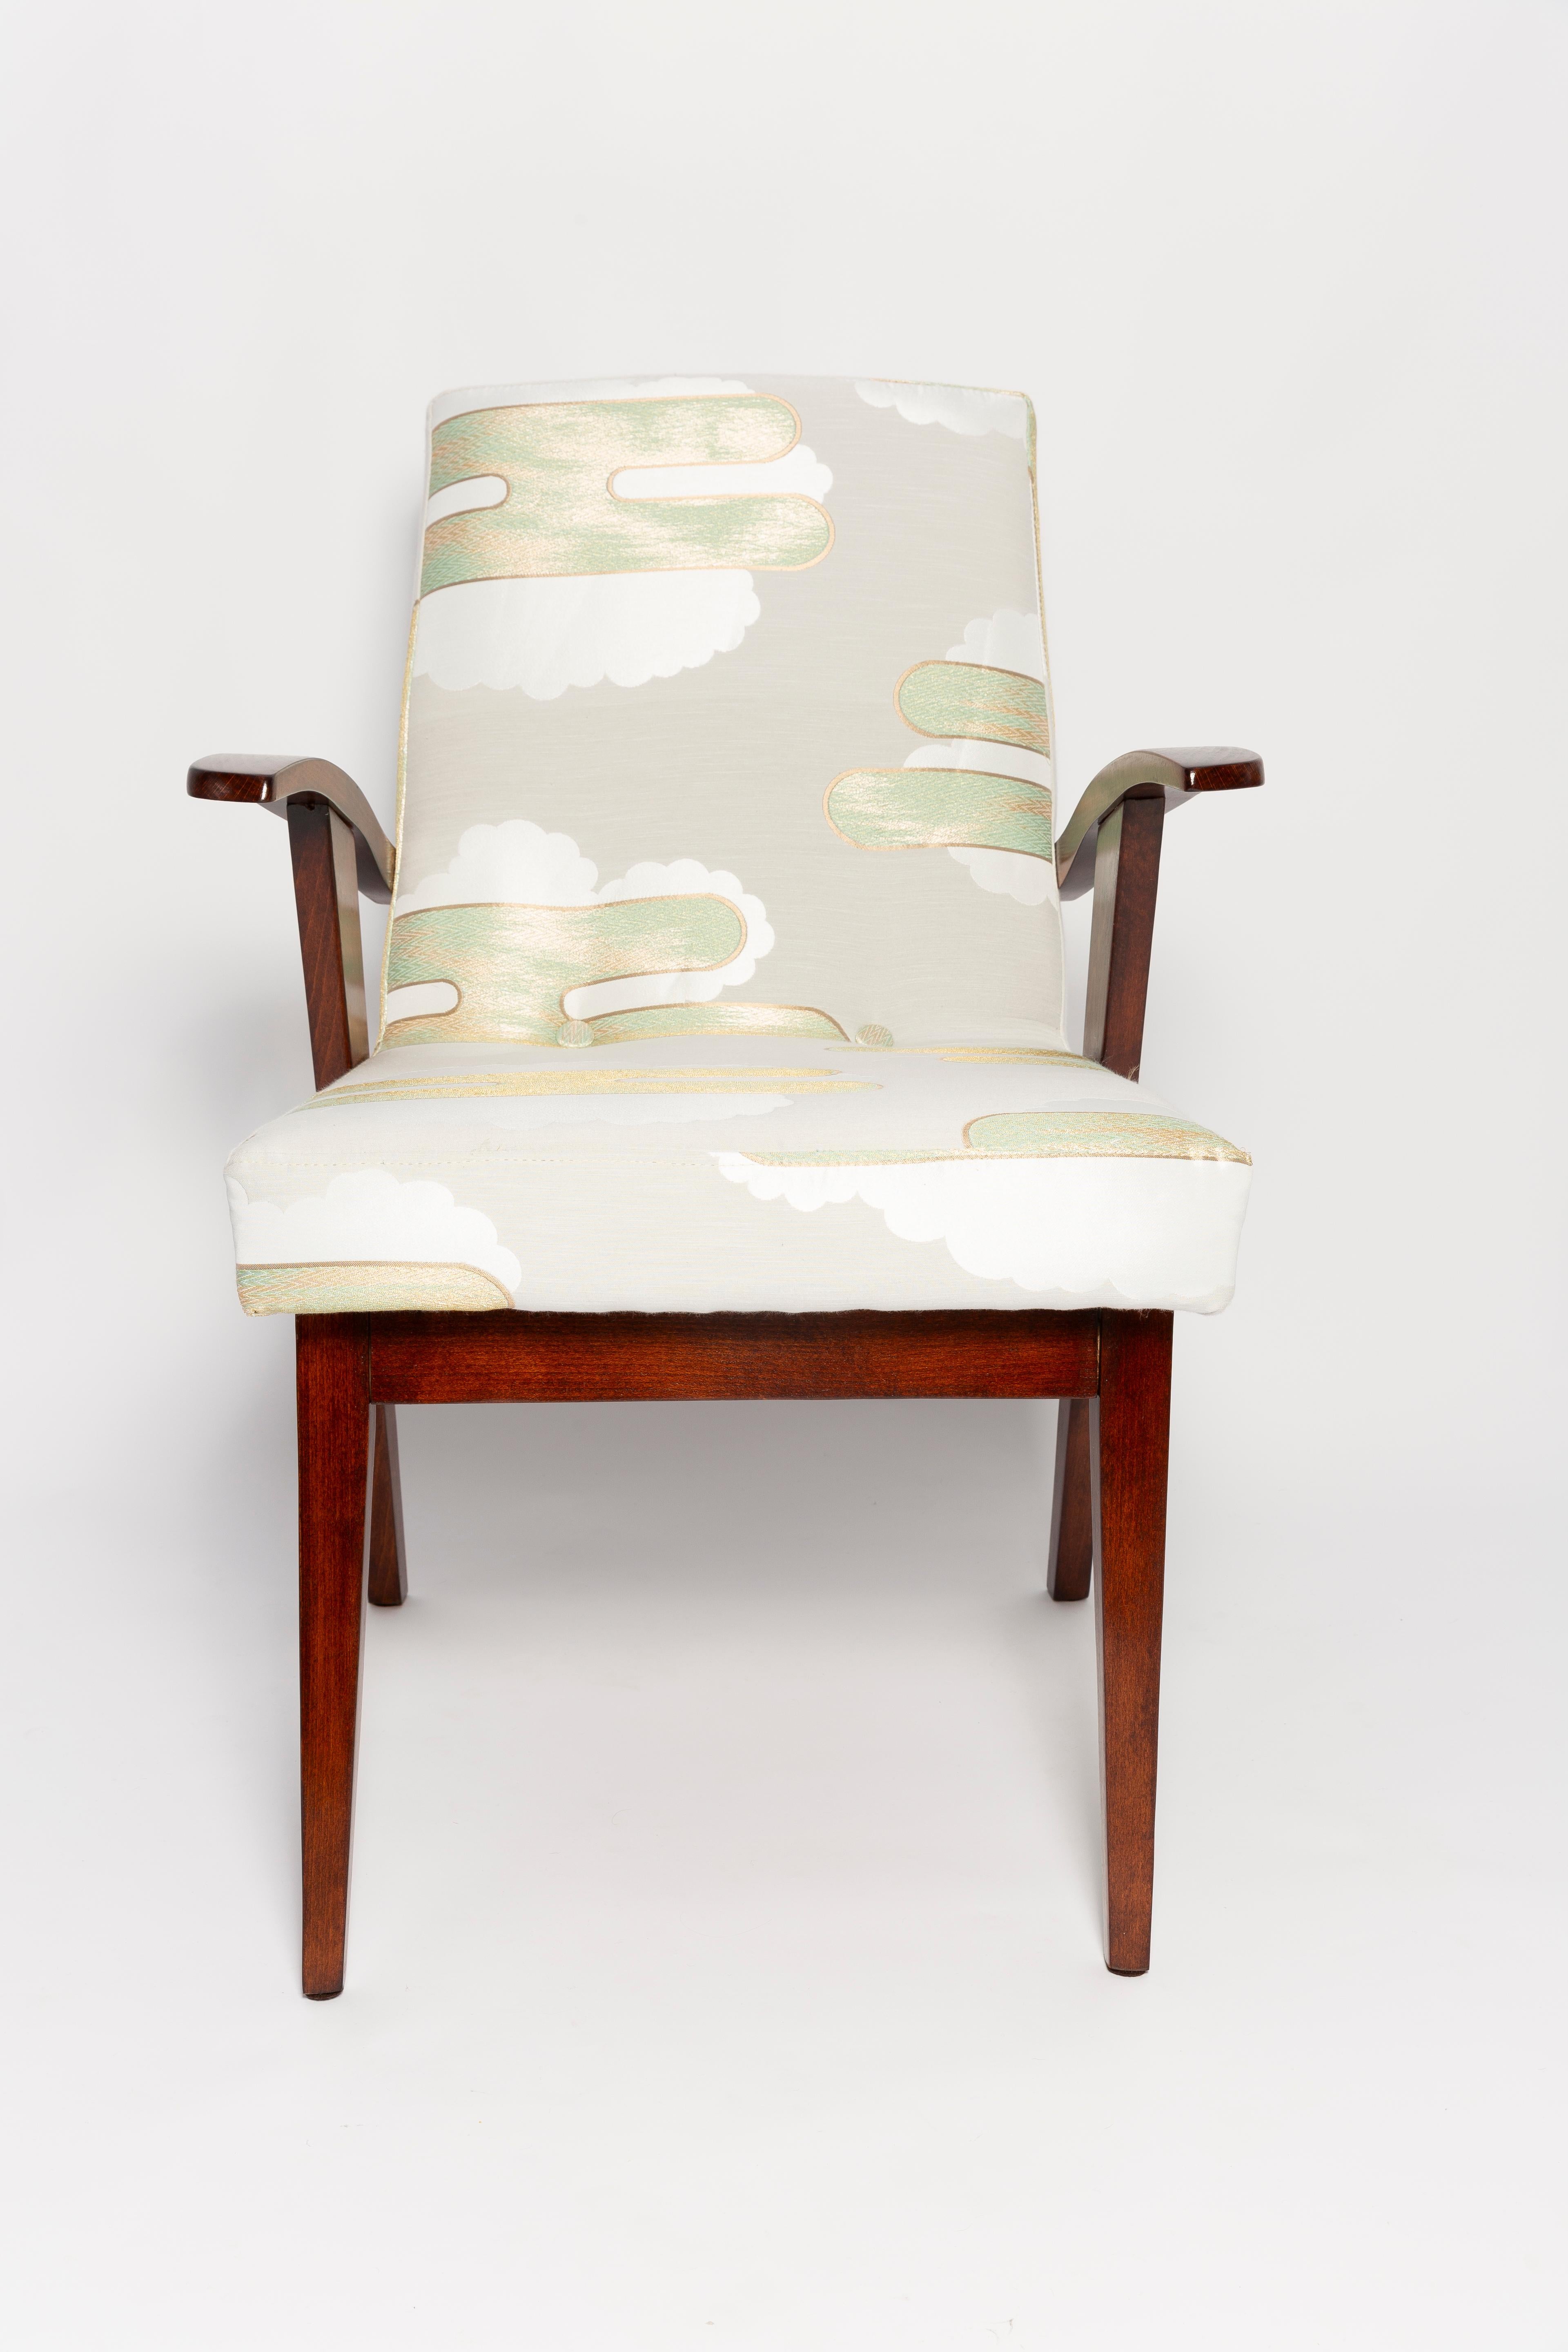 20th Century Mid Century Lontano Jacquard Mint Green Armchair by M. Puchala, Europe, 1960s For Sale